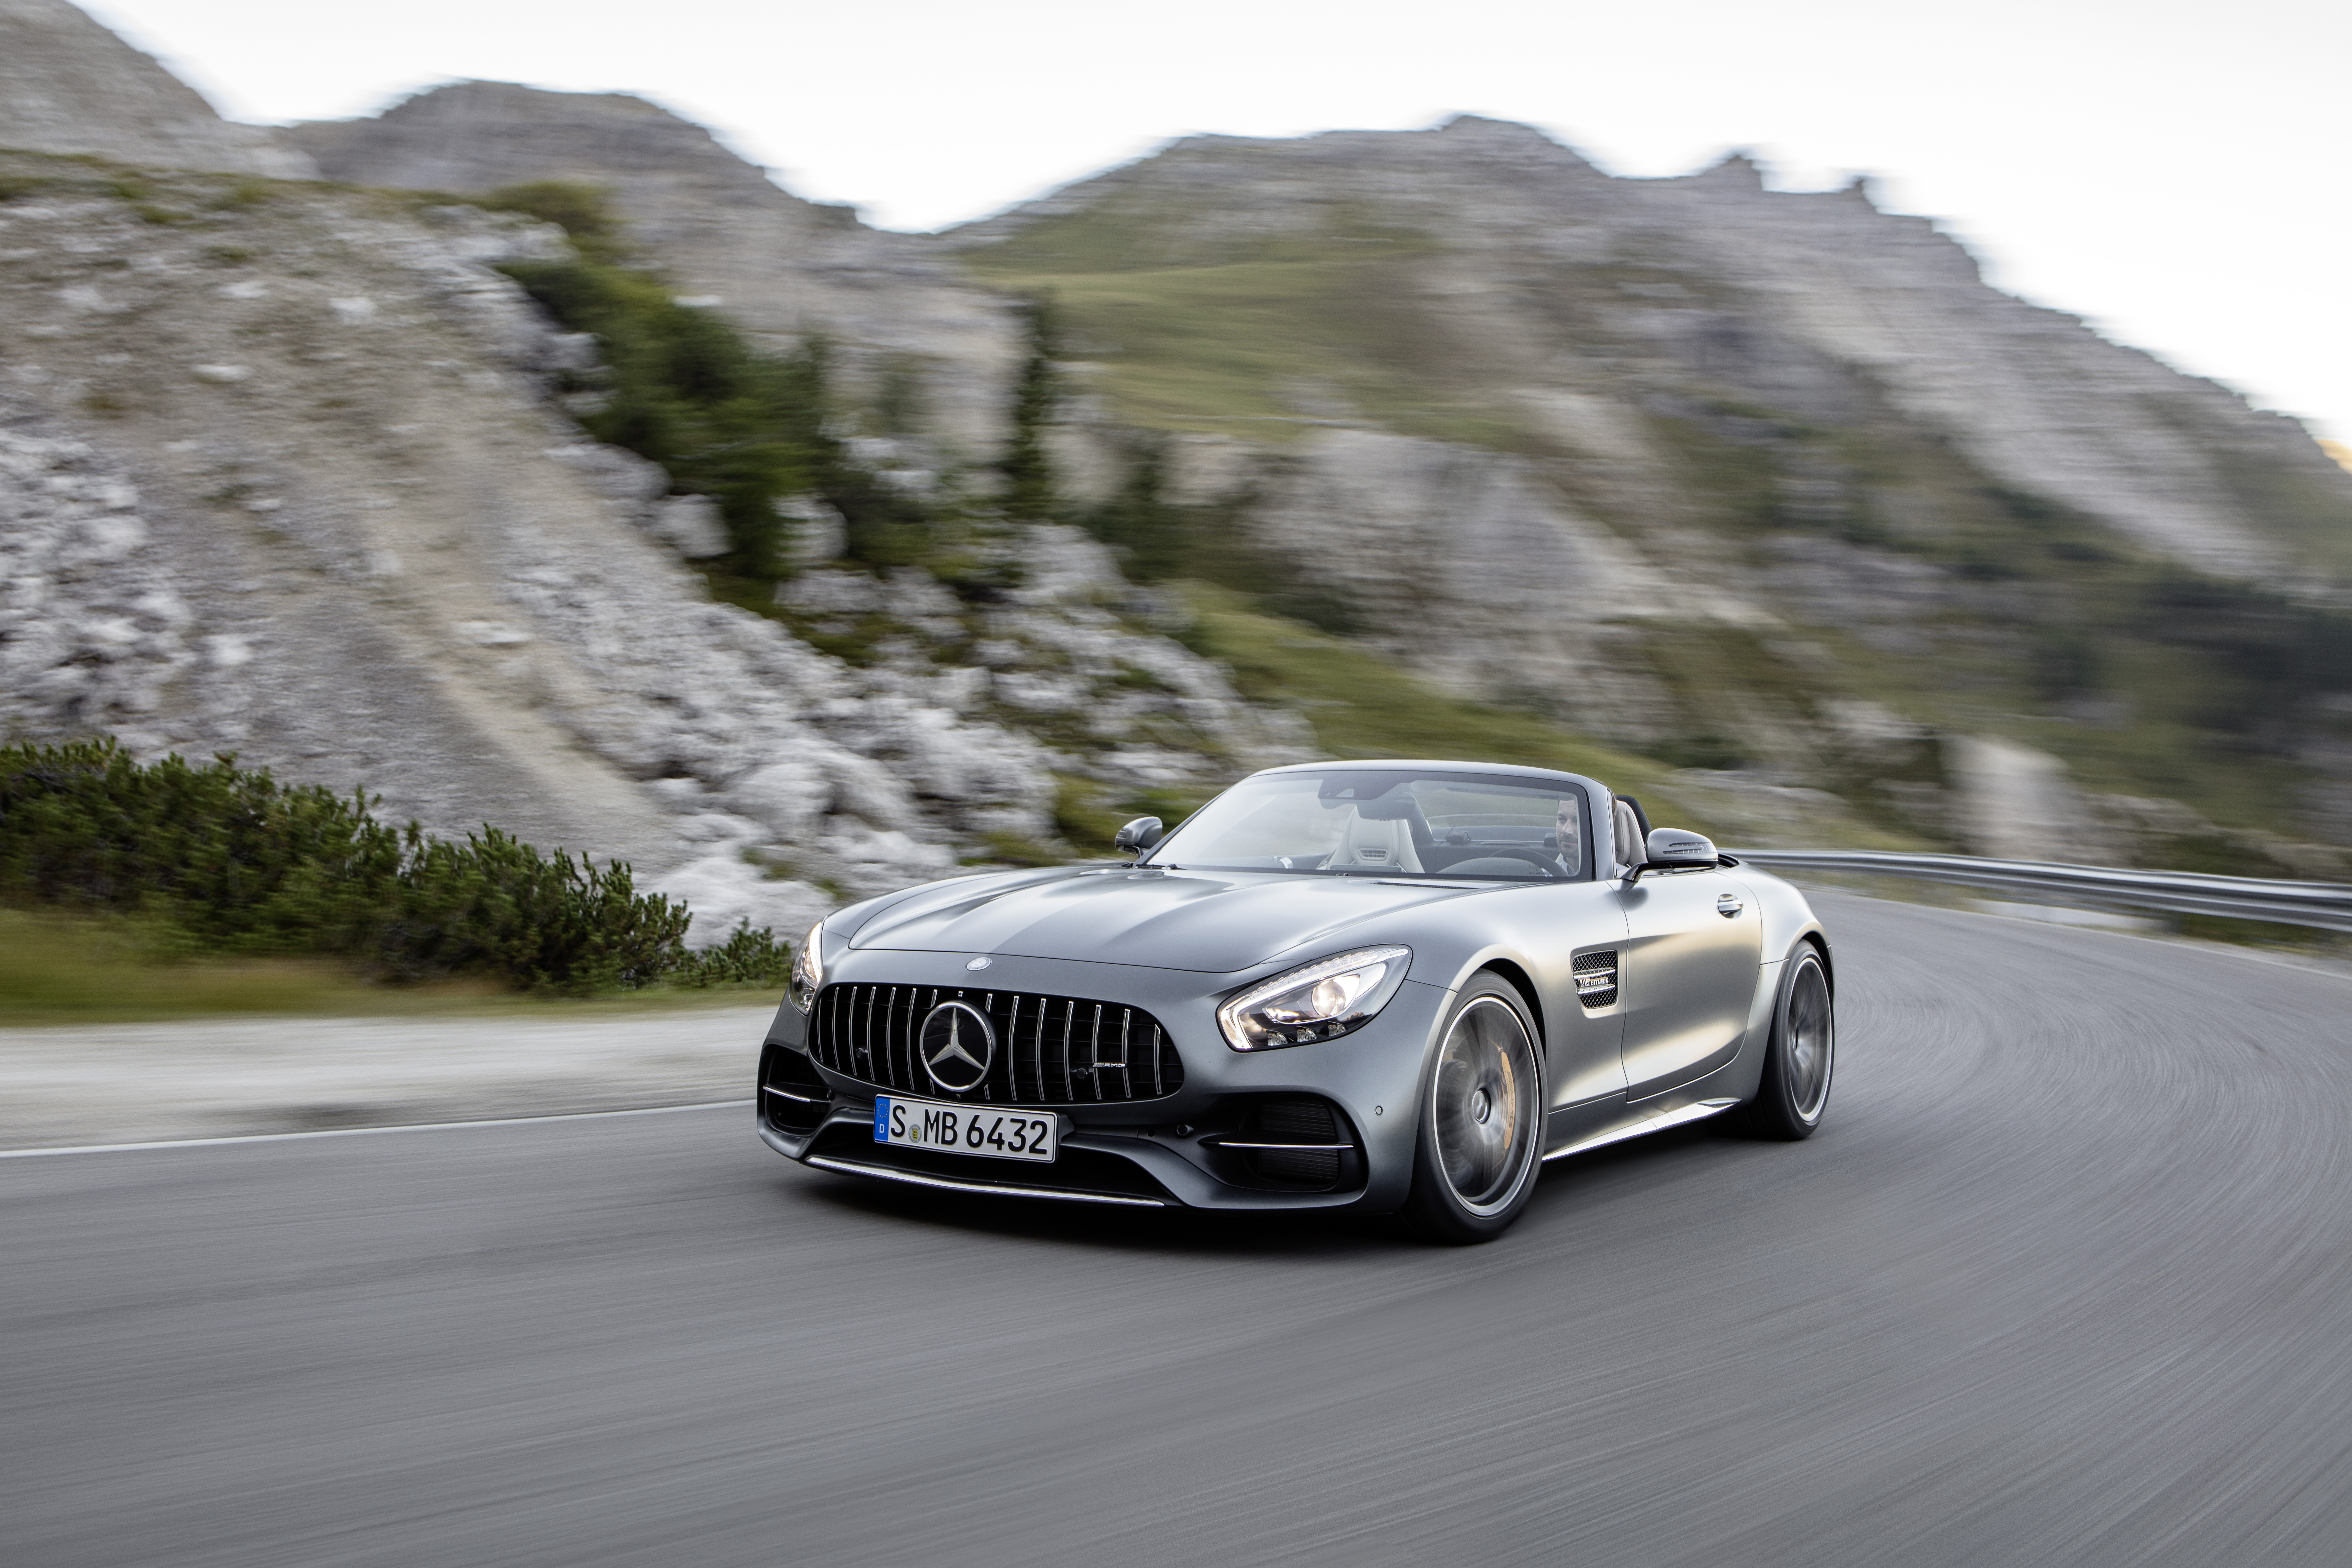 Mercedes Amg Gt Review A Supercar With An Identity All Of Its Own Evo